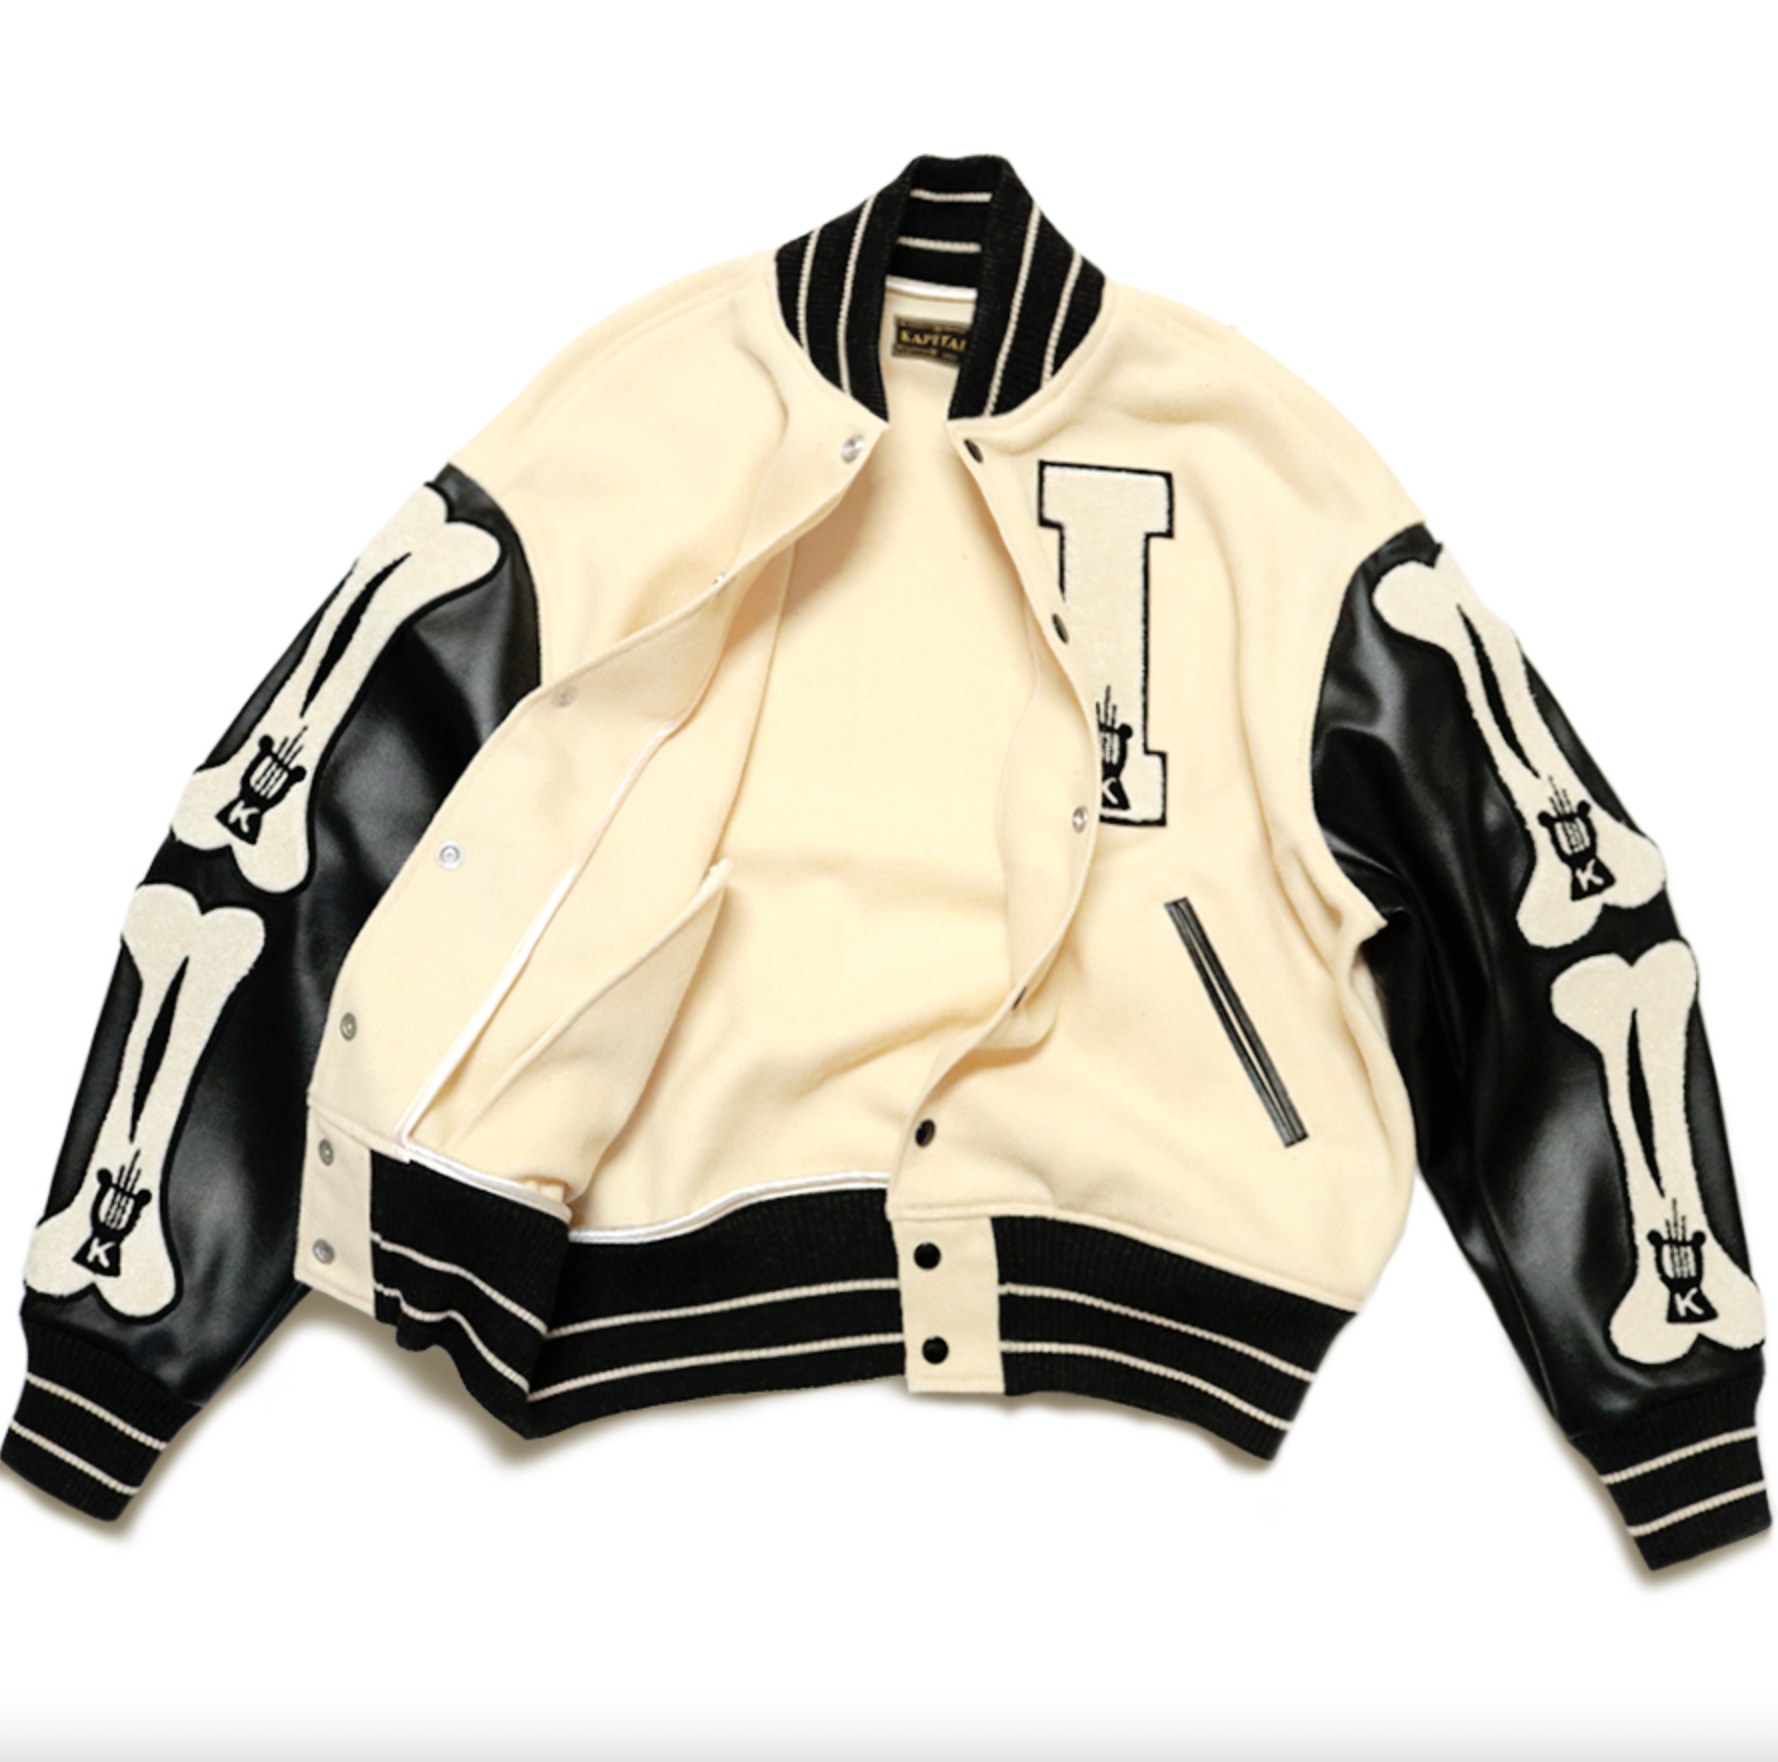 wool varsity jacket with Leather Details